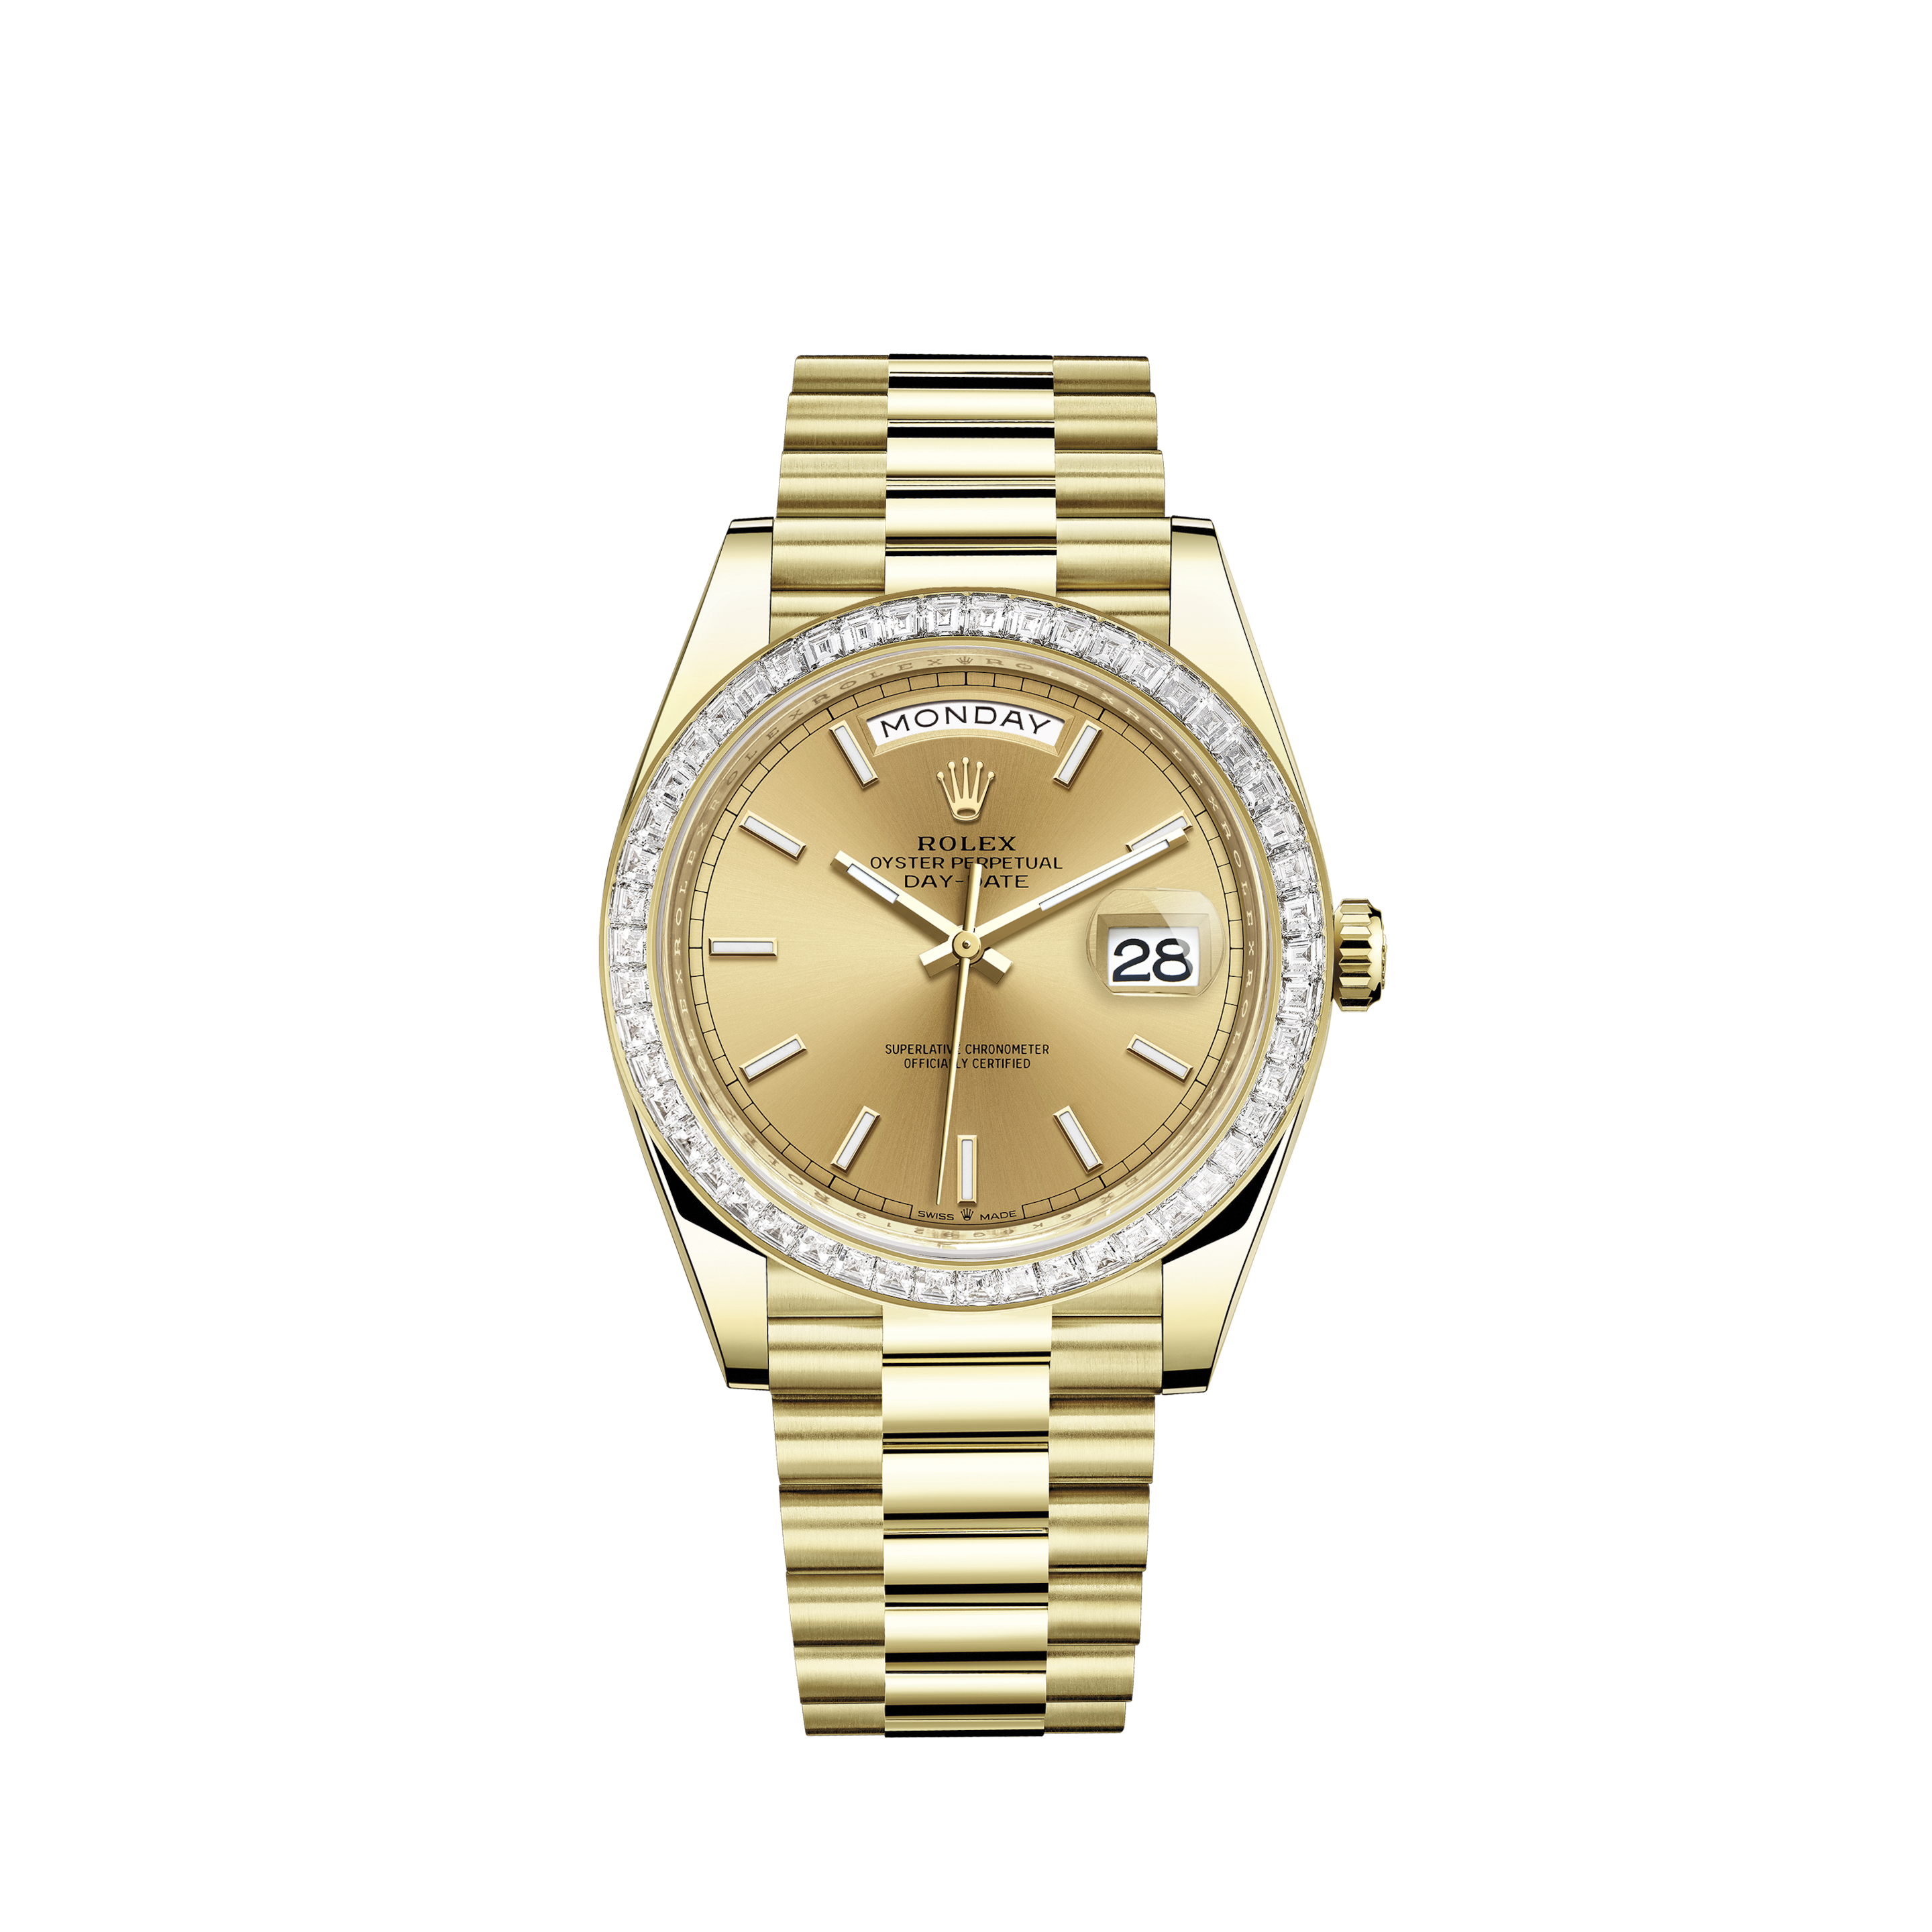 Rolex Datejust 16014 / Silver Grey Dial / BOX & PAPERS / White Gold / Jubilee / 36mm / 1989Rolex Pre-Owned Yellow Gold Daytona 116528 Custom Rainbow Diamonds